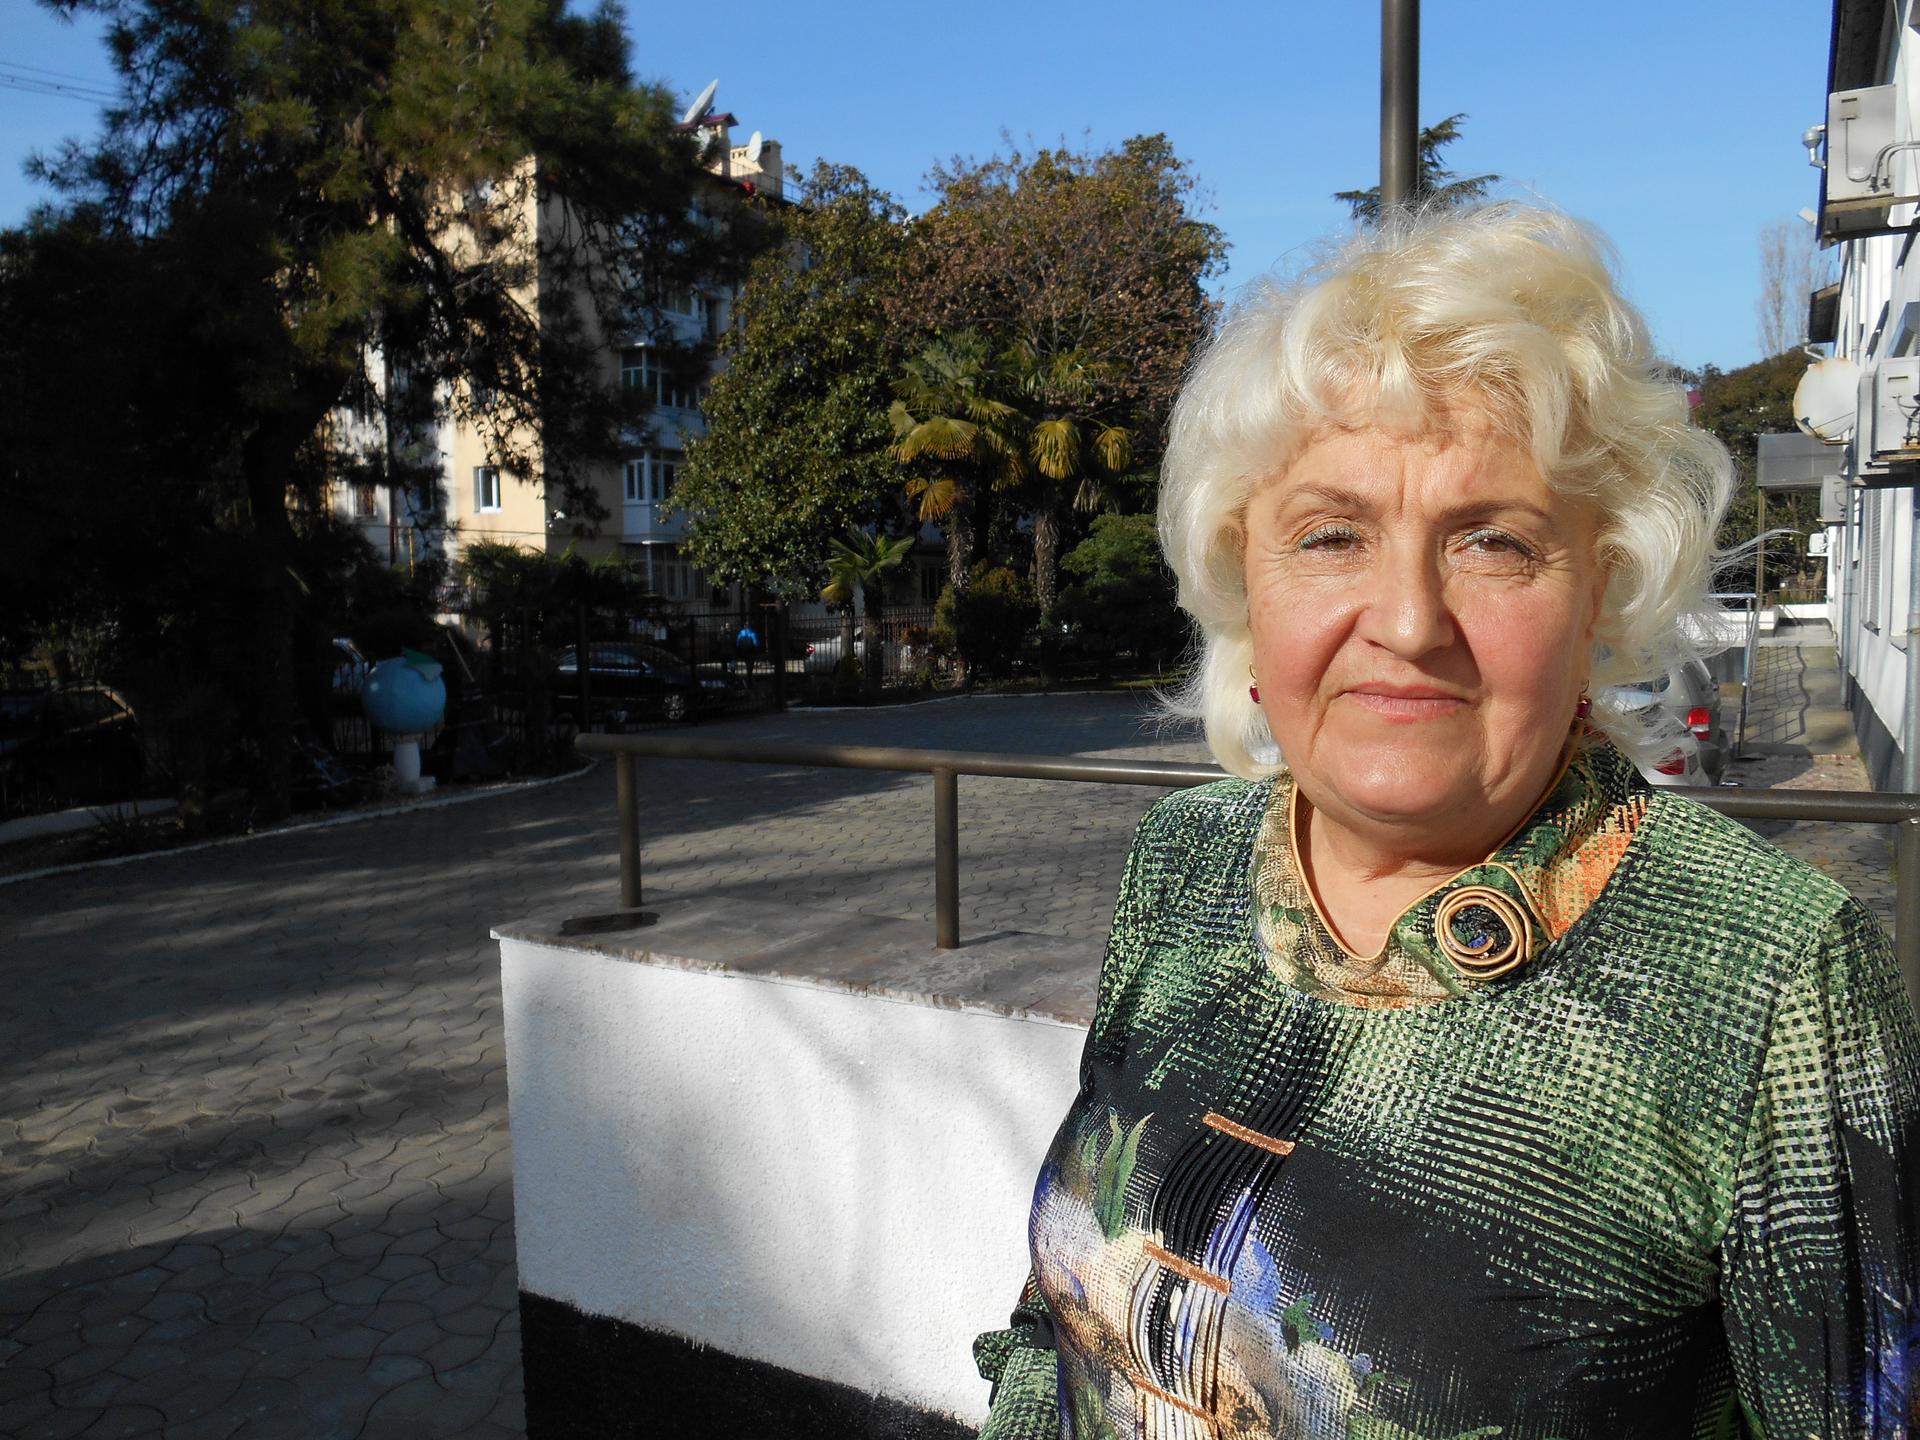 Lyubov Varicheva teaches English at the Sochi College of Multicultural Education in Russia. She says because of "volunteering" demands on teachers here, her students probably won’t get much in the way of instruction during the Sochi Winter Olympics.